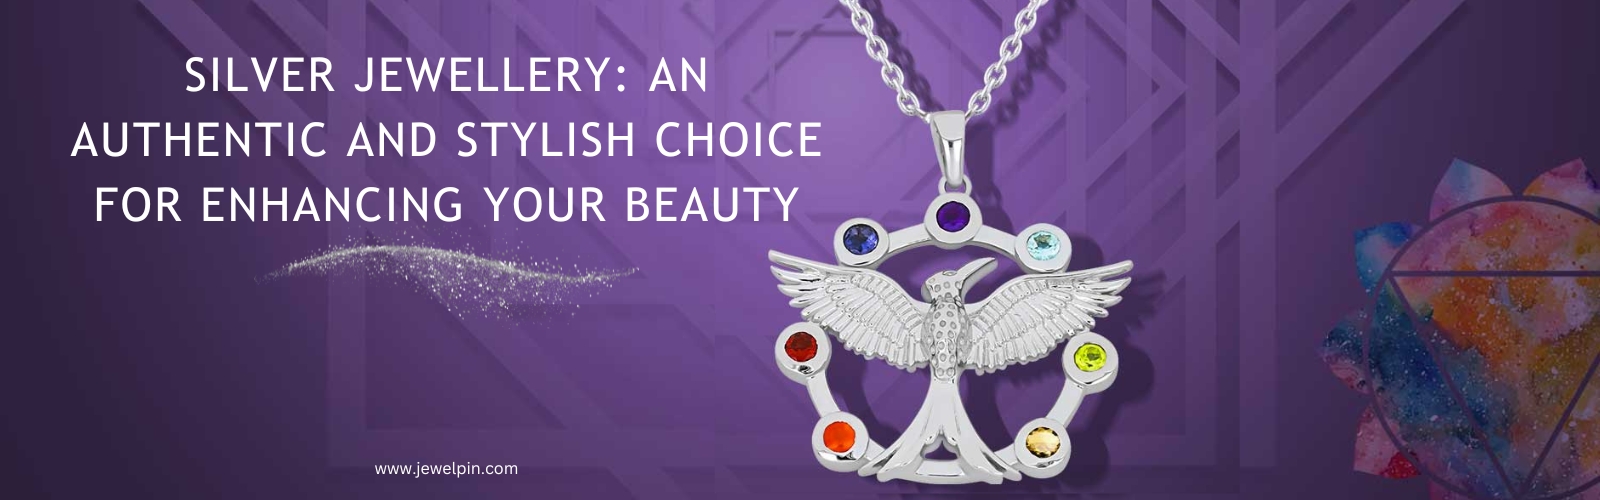 silver jewellery an authentic and stylish choice for enhancing your beauty